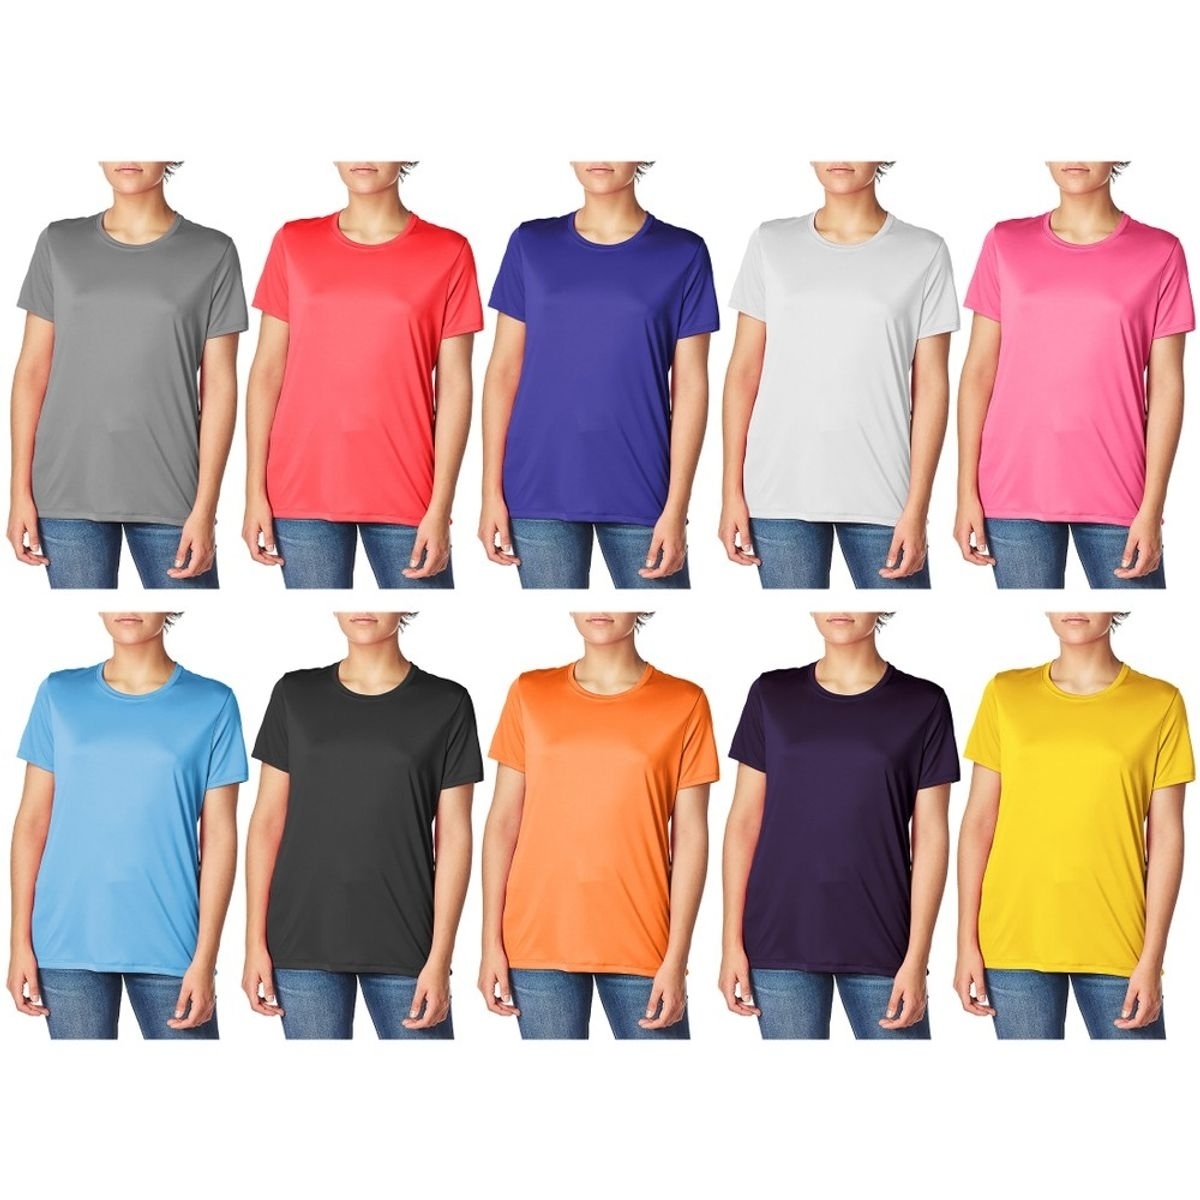 4-Pack: Women's Cool Dri-FIt Moisture Wicking Sim-Fit Long Sleeve Crew Neck T-Shirts - Large